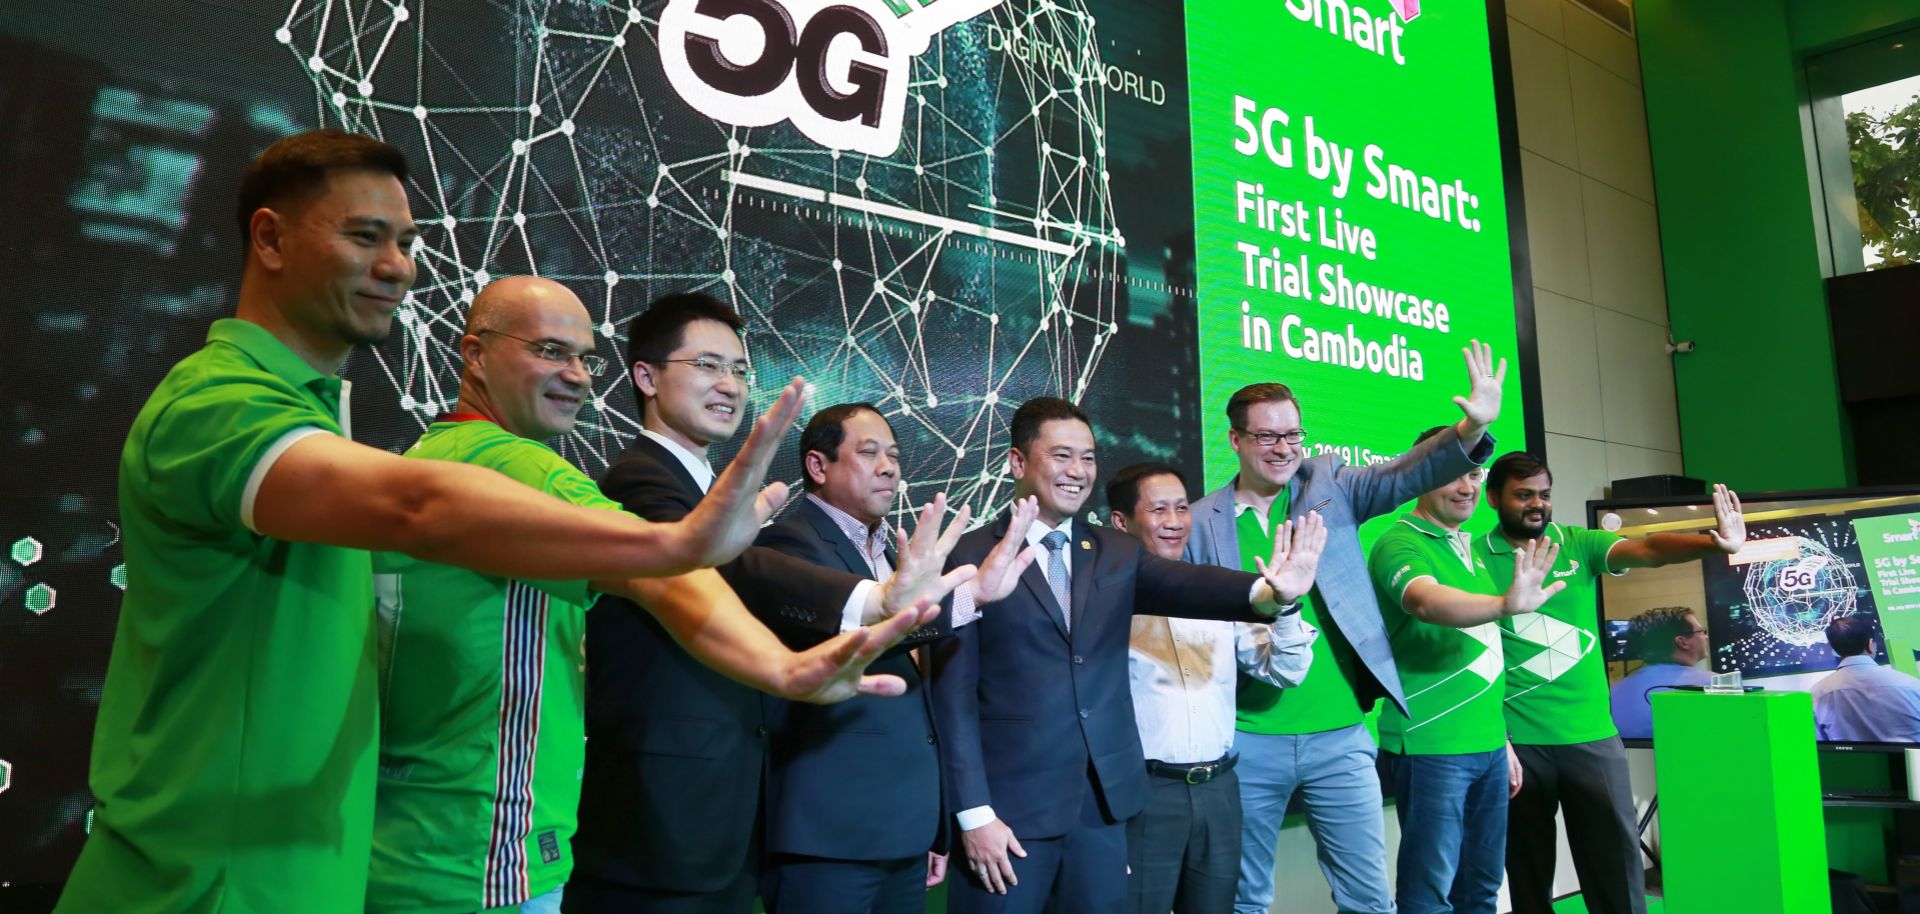 Beyond 5G networks like the one Huawei is helping build in Cambodia with partner Smart Axiata, Chinese companies are aggressively building cloud computing and ecommerce businesses to serve markets in Southeast Asia.